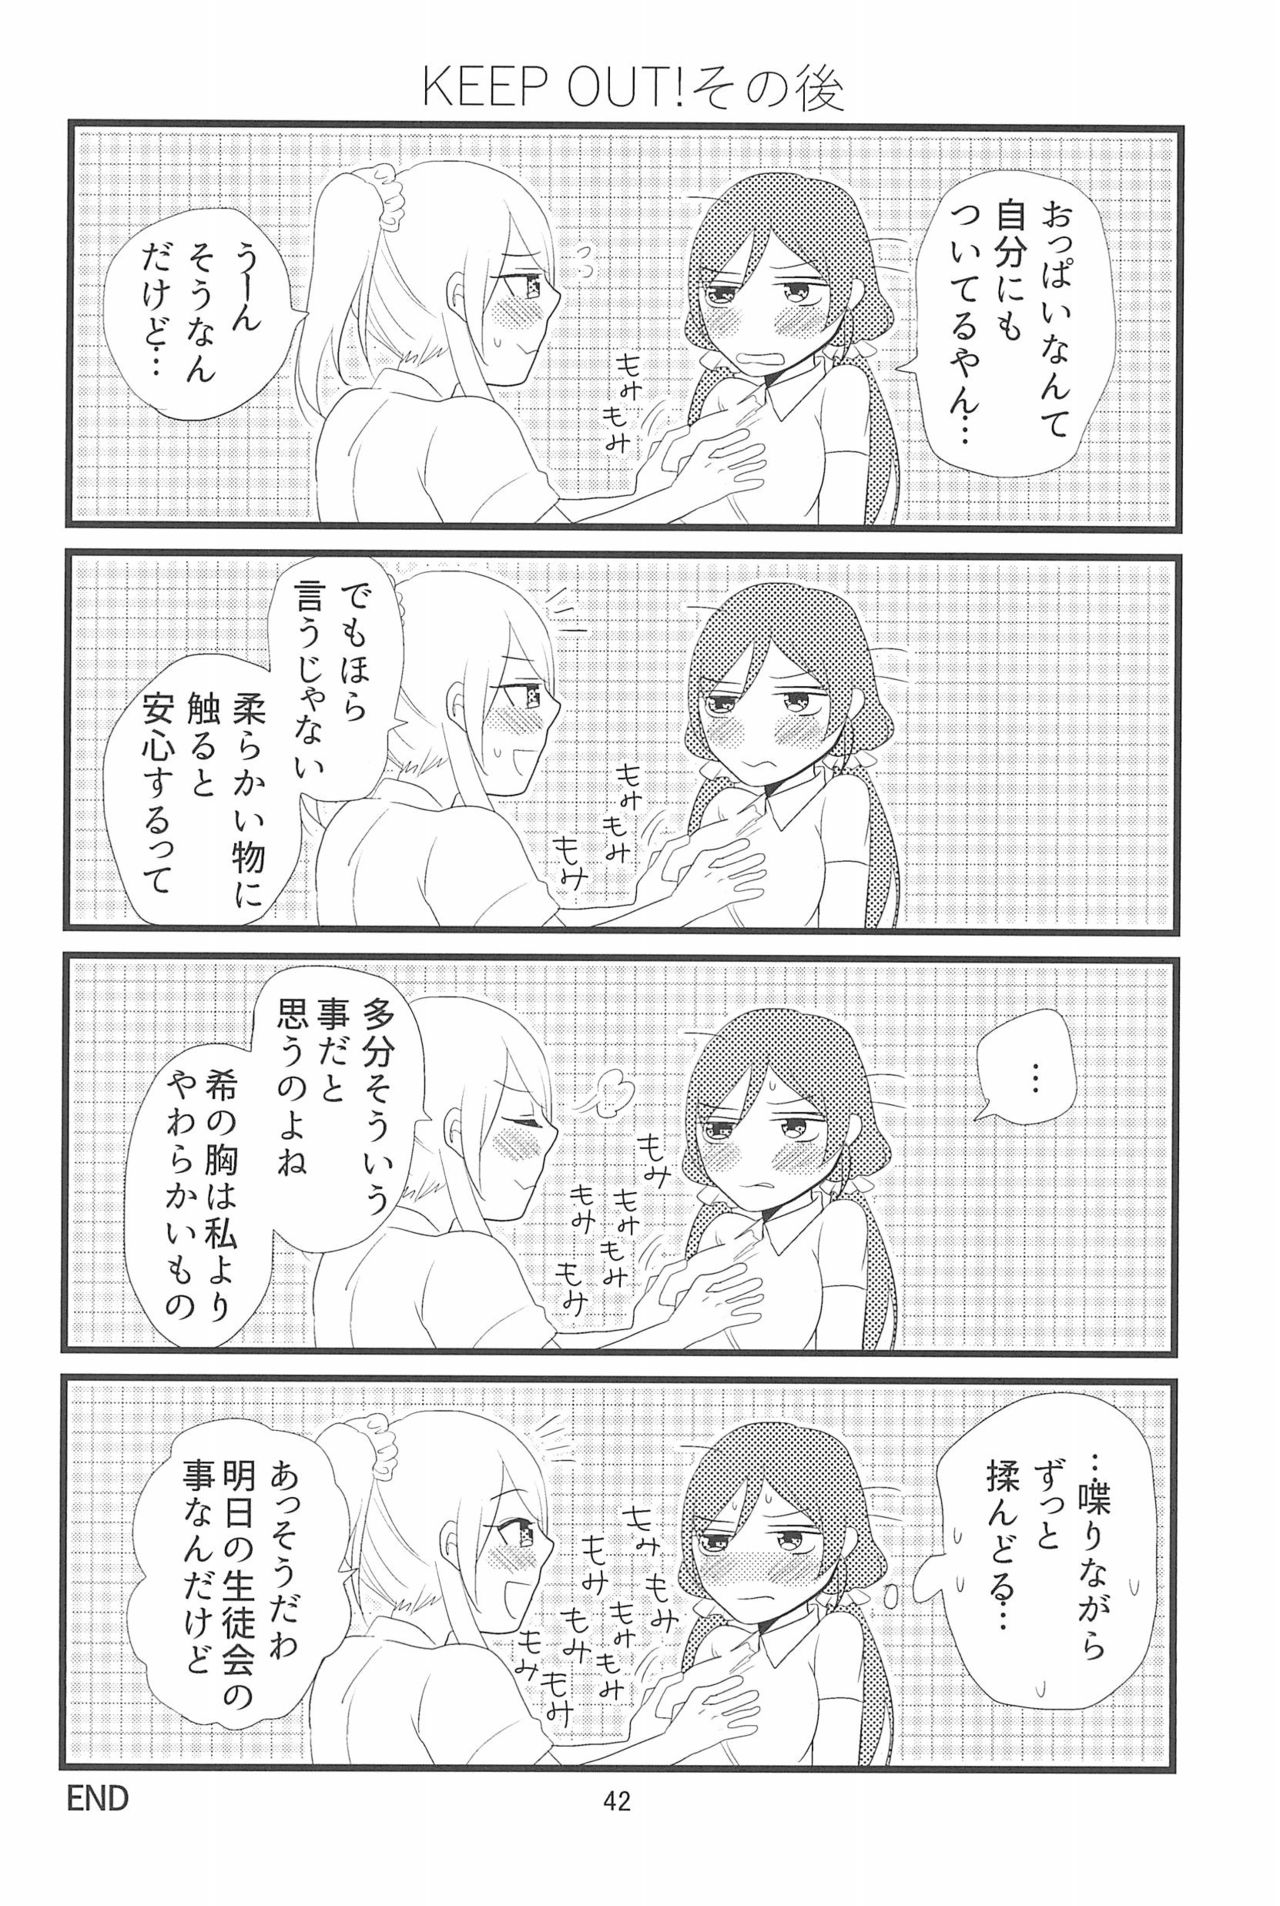 (C90) [BK*N2 (Mikawa Miso)] HAPPY GO LUCKY DAYS (Love Live!) page 46 full